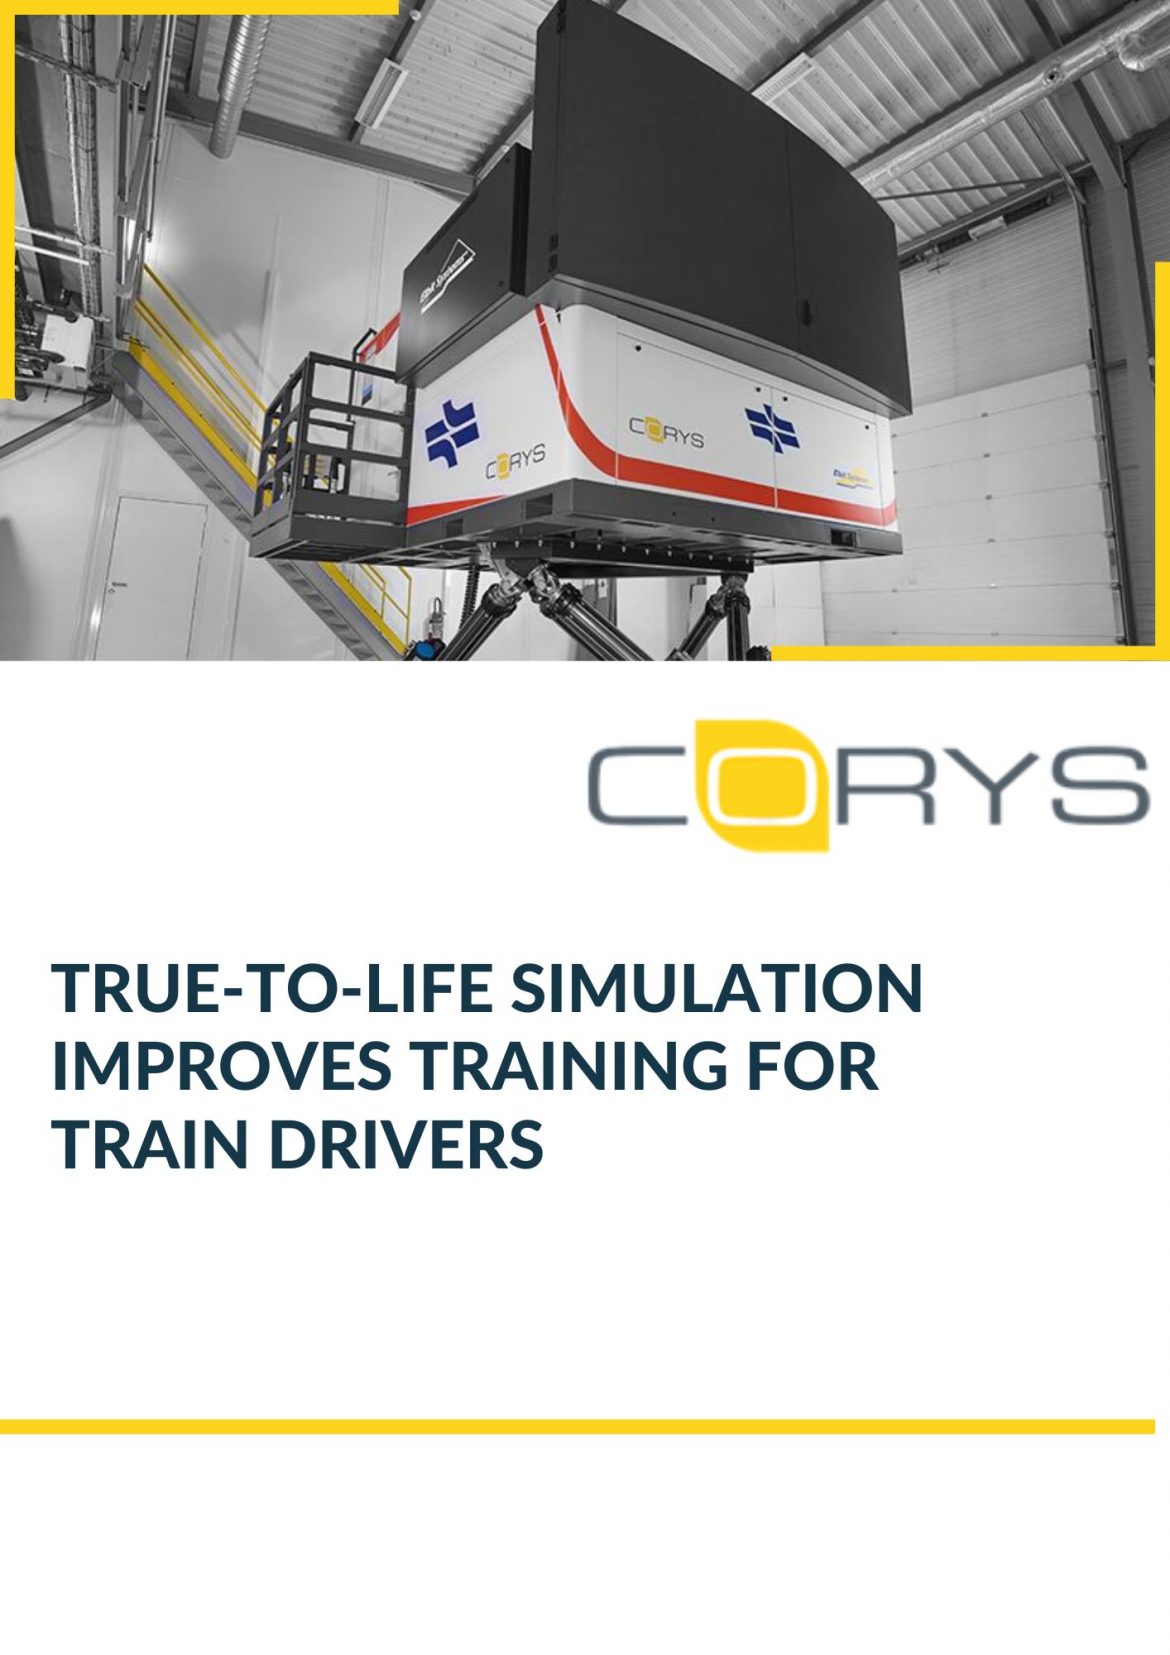 True-to-life simulation improves training for train drivers